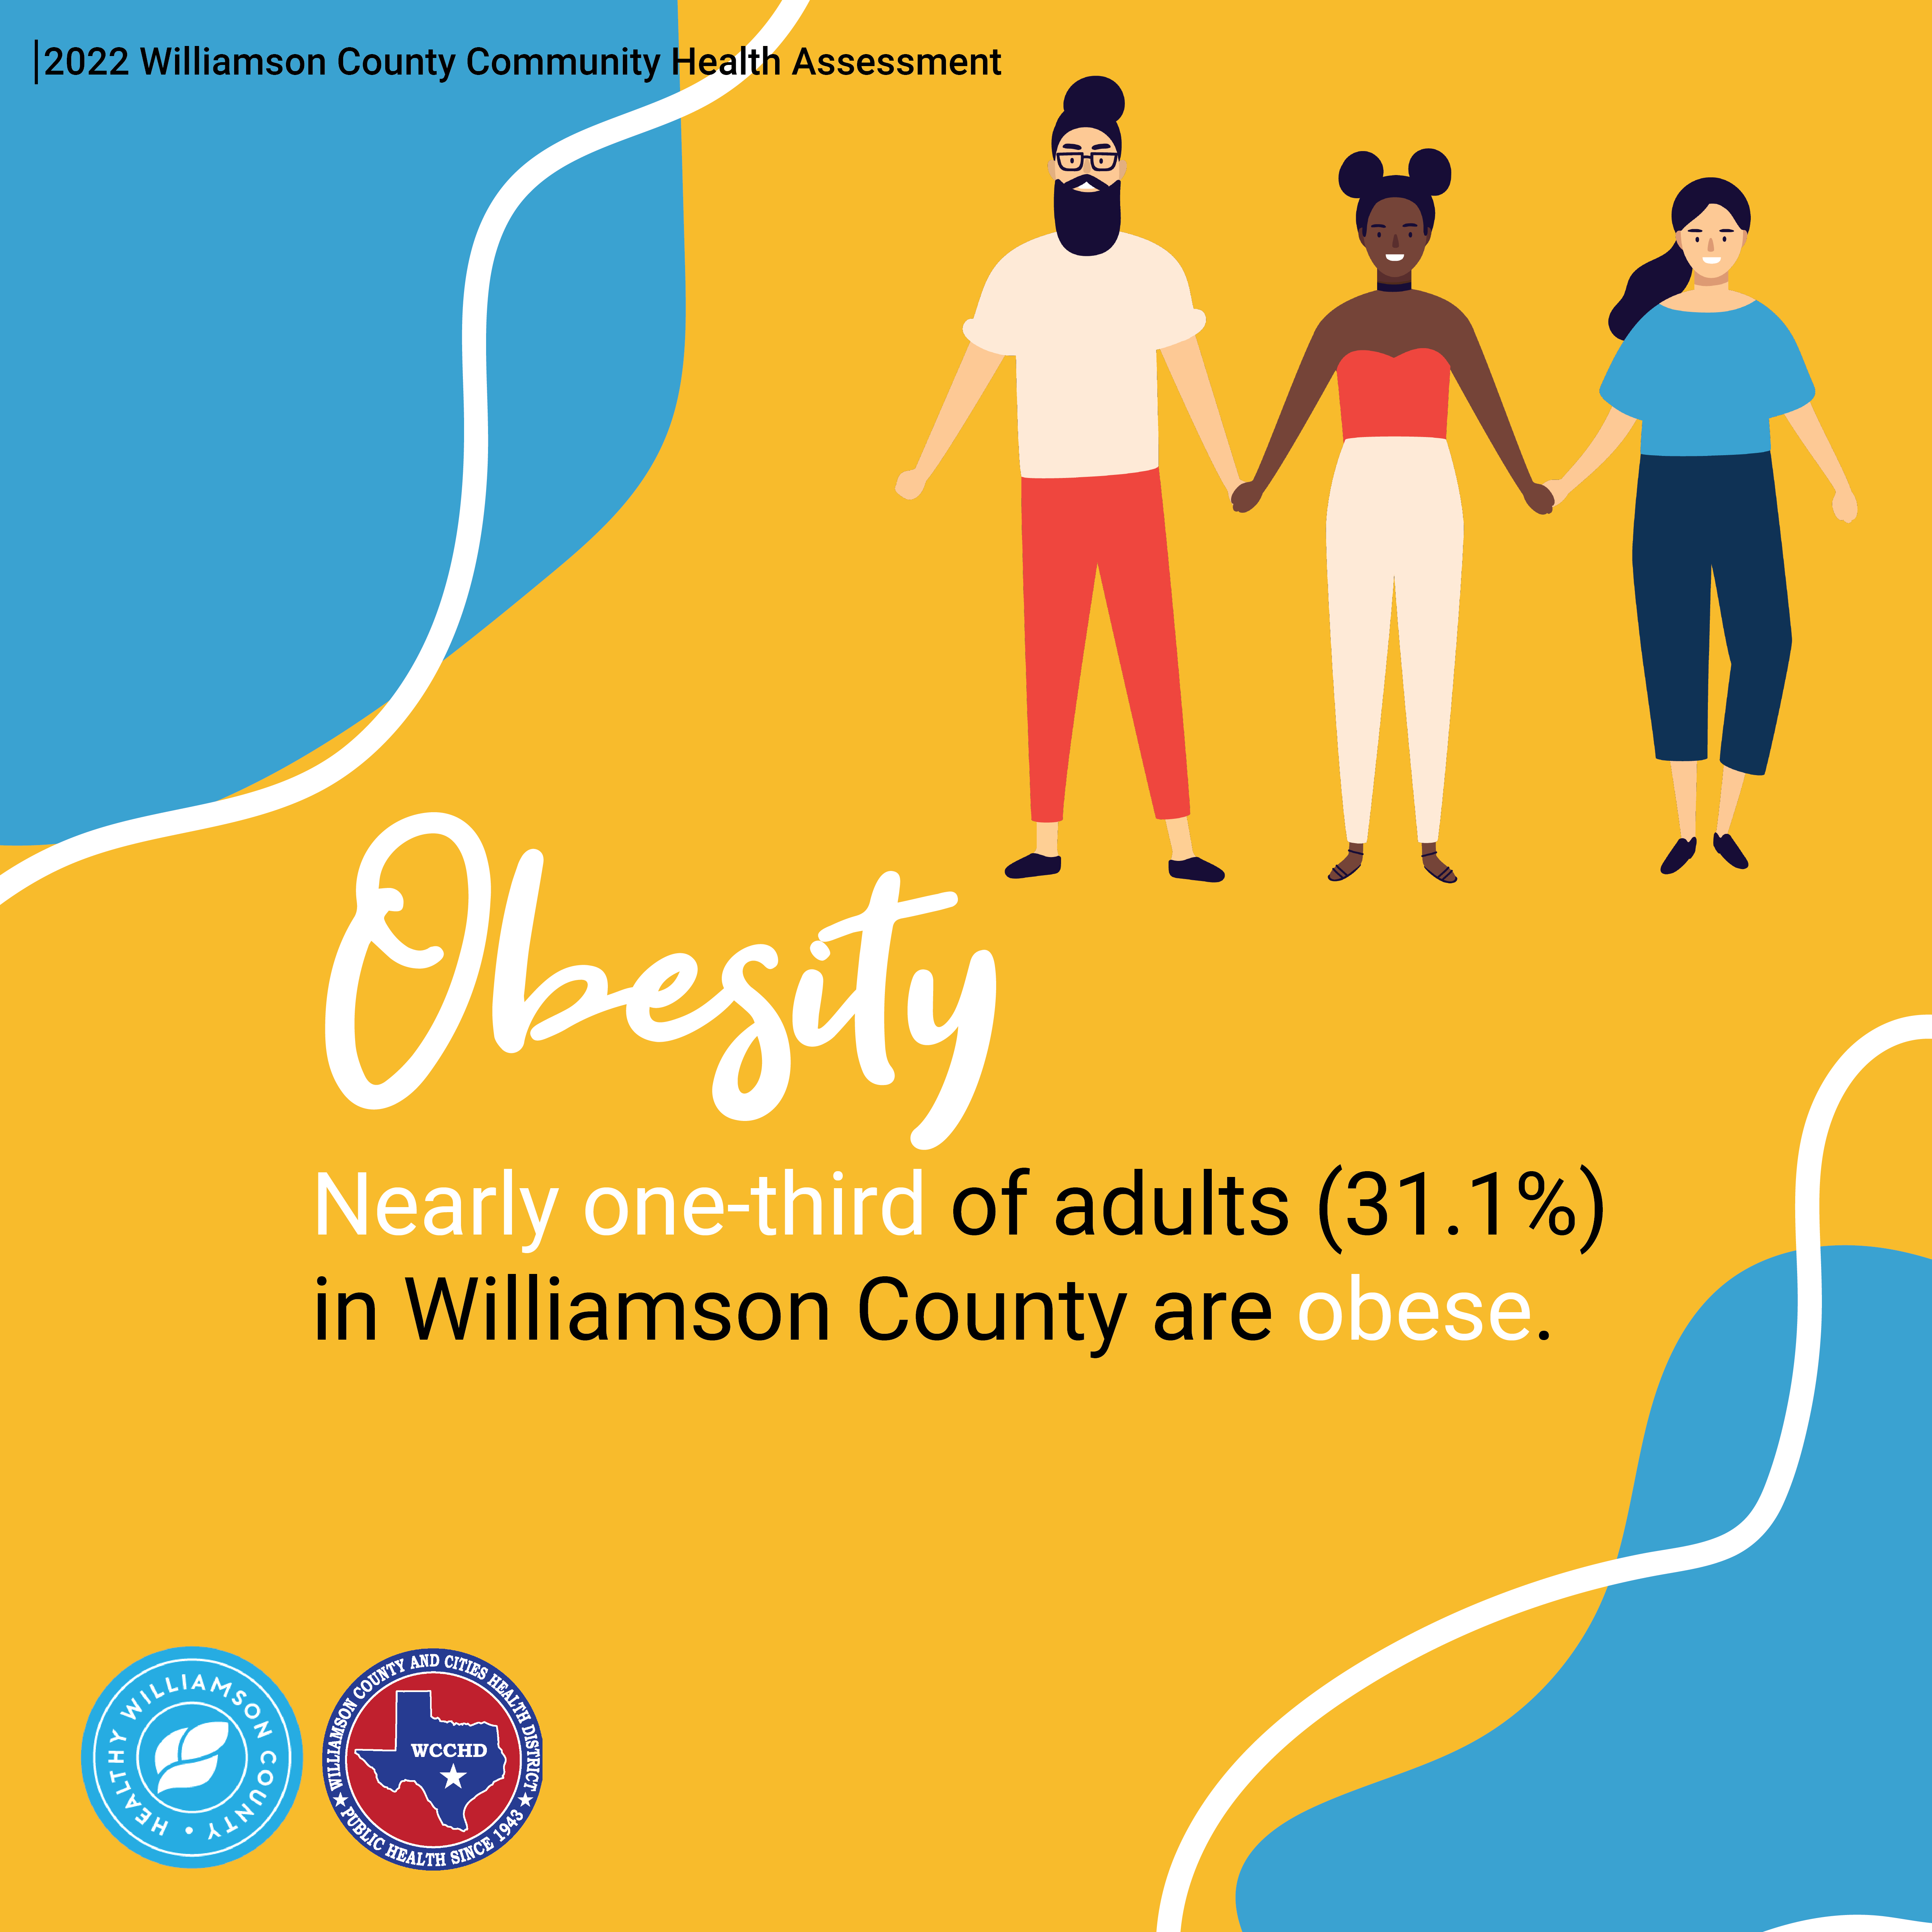 2022 Williamson County Community Health Assessment. Obesity. Nearly one-third of adults (31.1%) in Williamson County are obese. Above, three illustrated people holding hands and smiling. Blobs and squiggly lines in top left and bottom right corners. At the bottom, logos of Healthy Williamson County and Williamson County and Cities Health District.